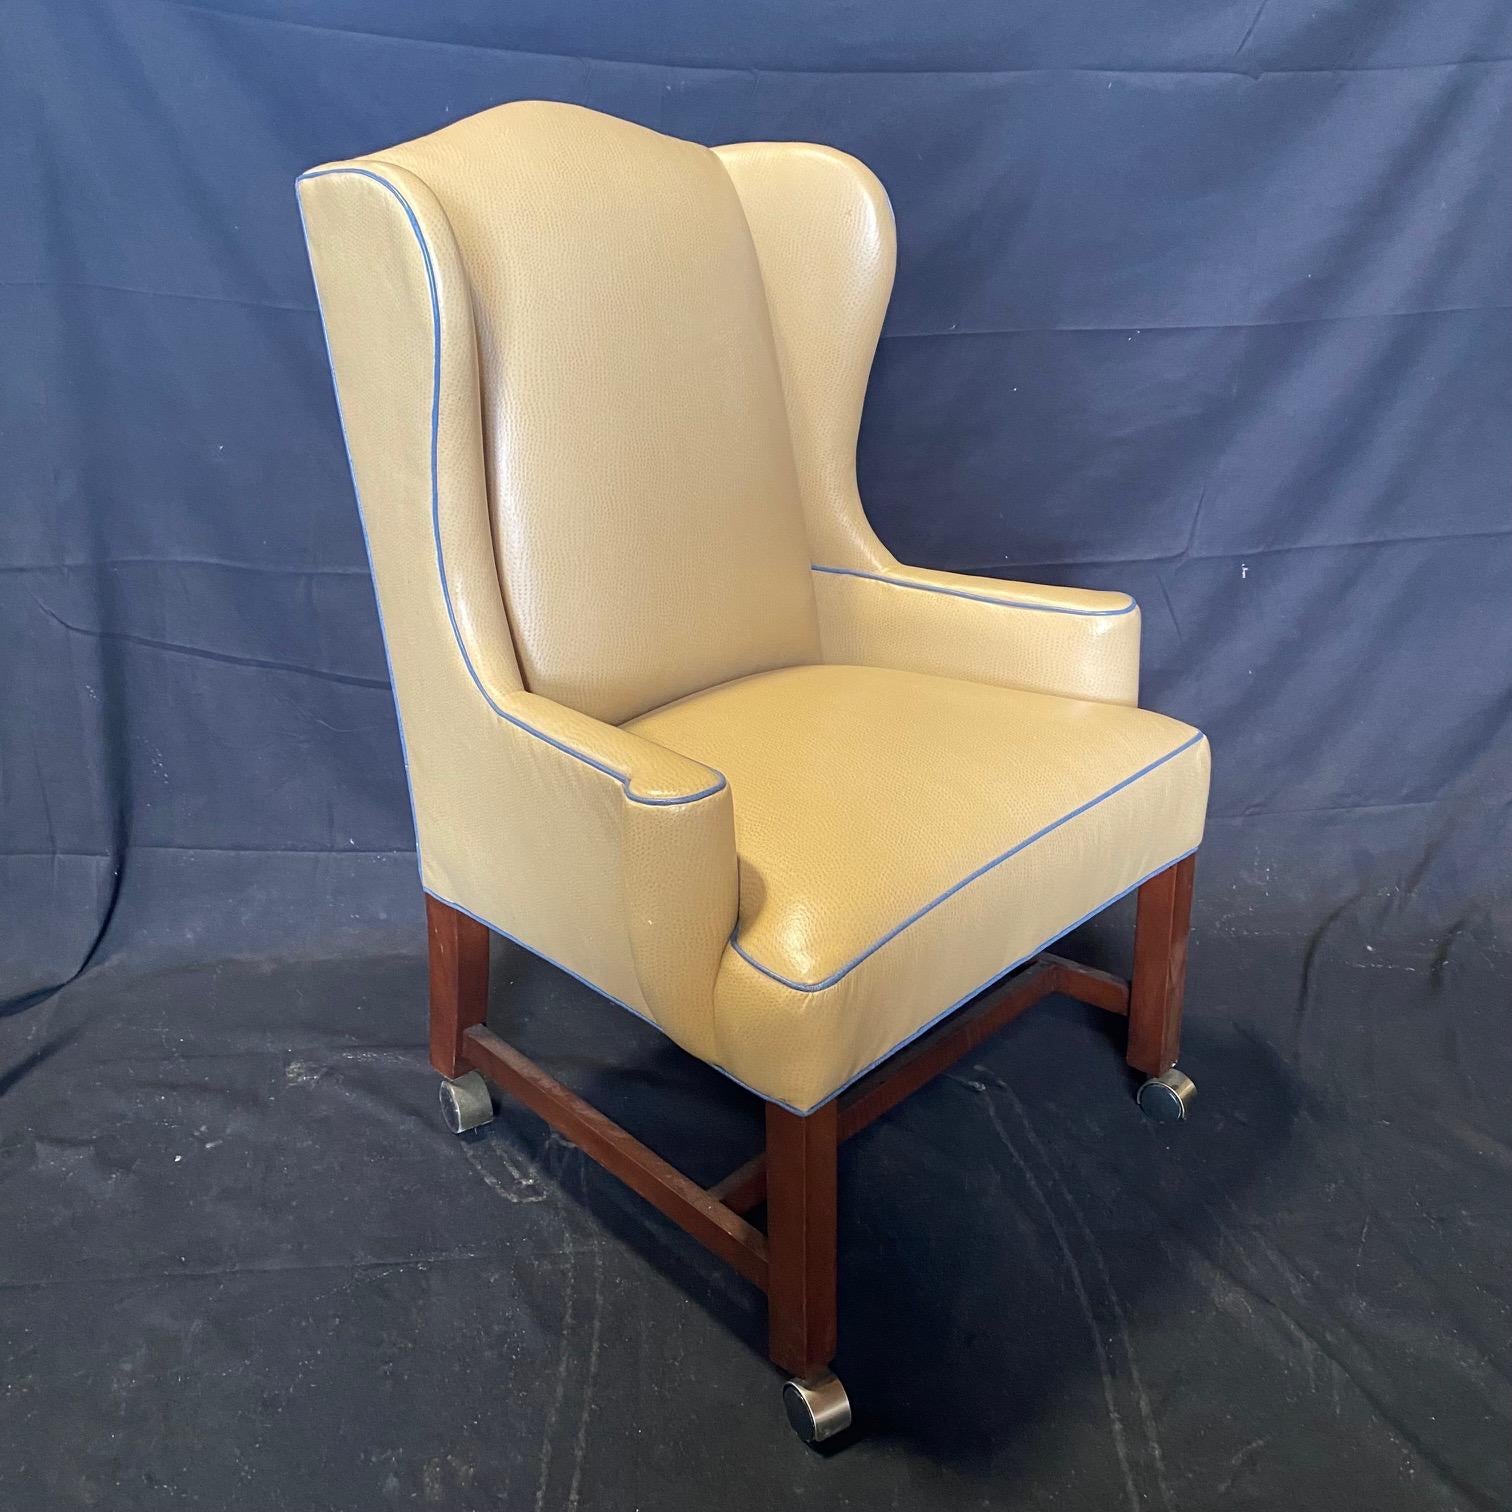  George III style beige leather wing chair of typical shape and mid sized proportions with pepper box arms set above square front legs and slightly outswept back legs. Upholstered in stunning creamy beige snakeskin imprinted leather with classic